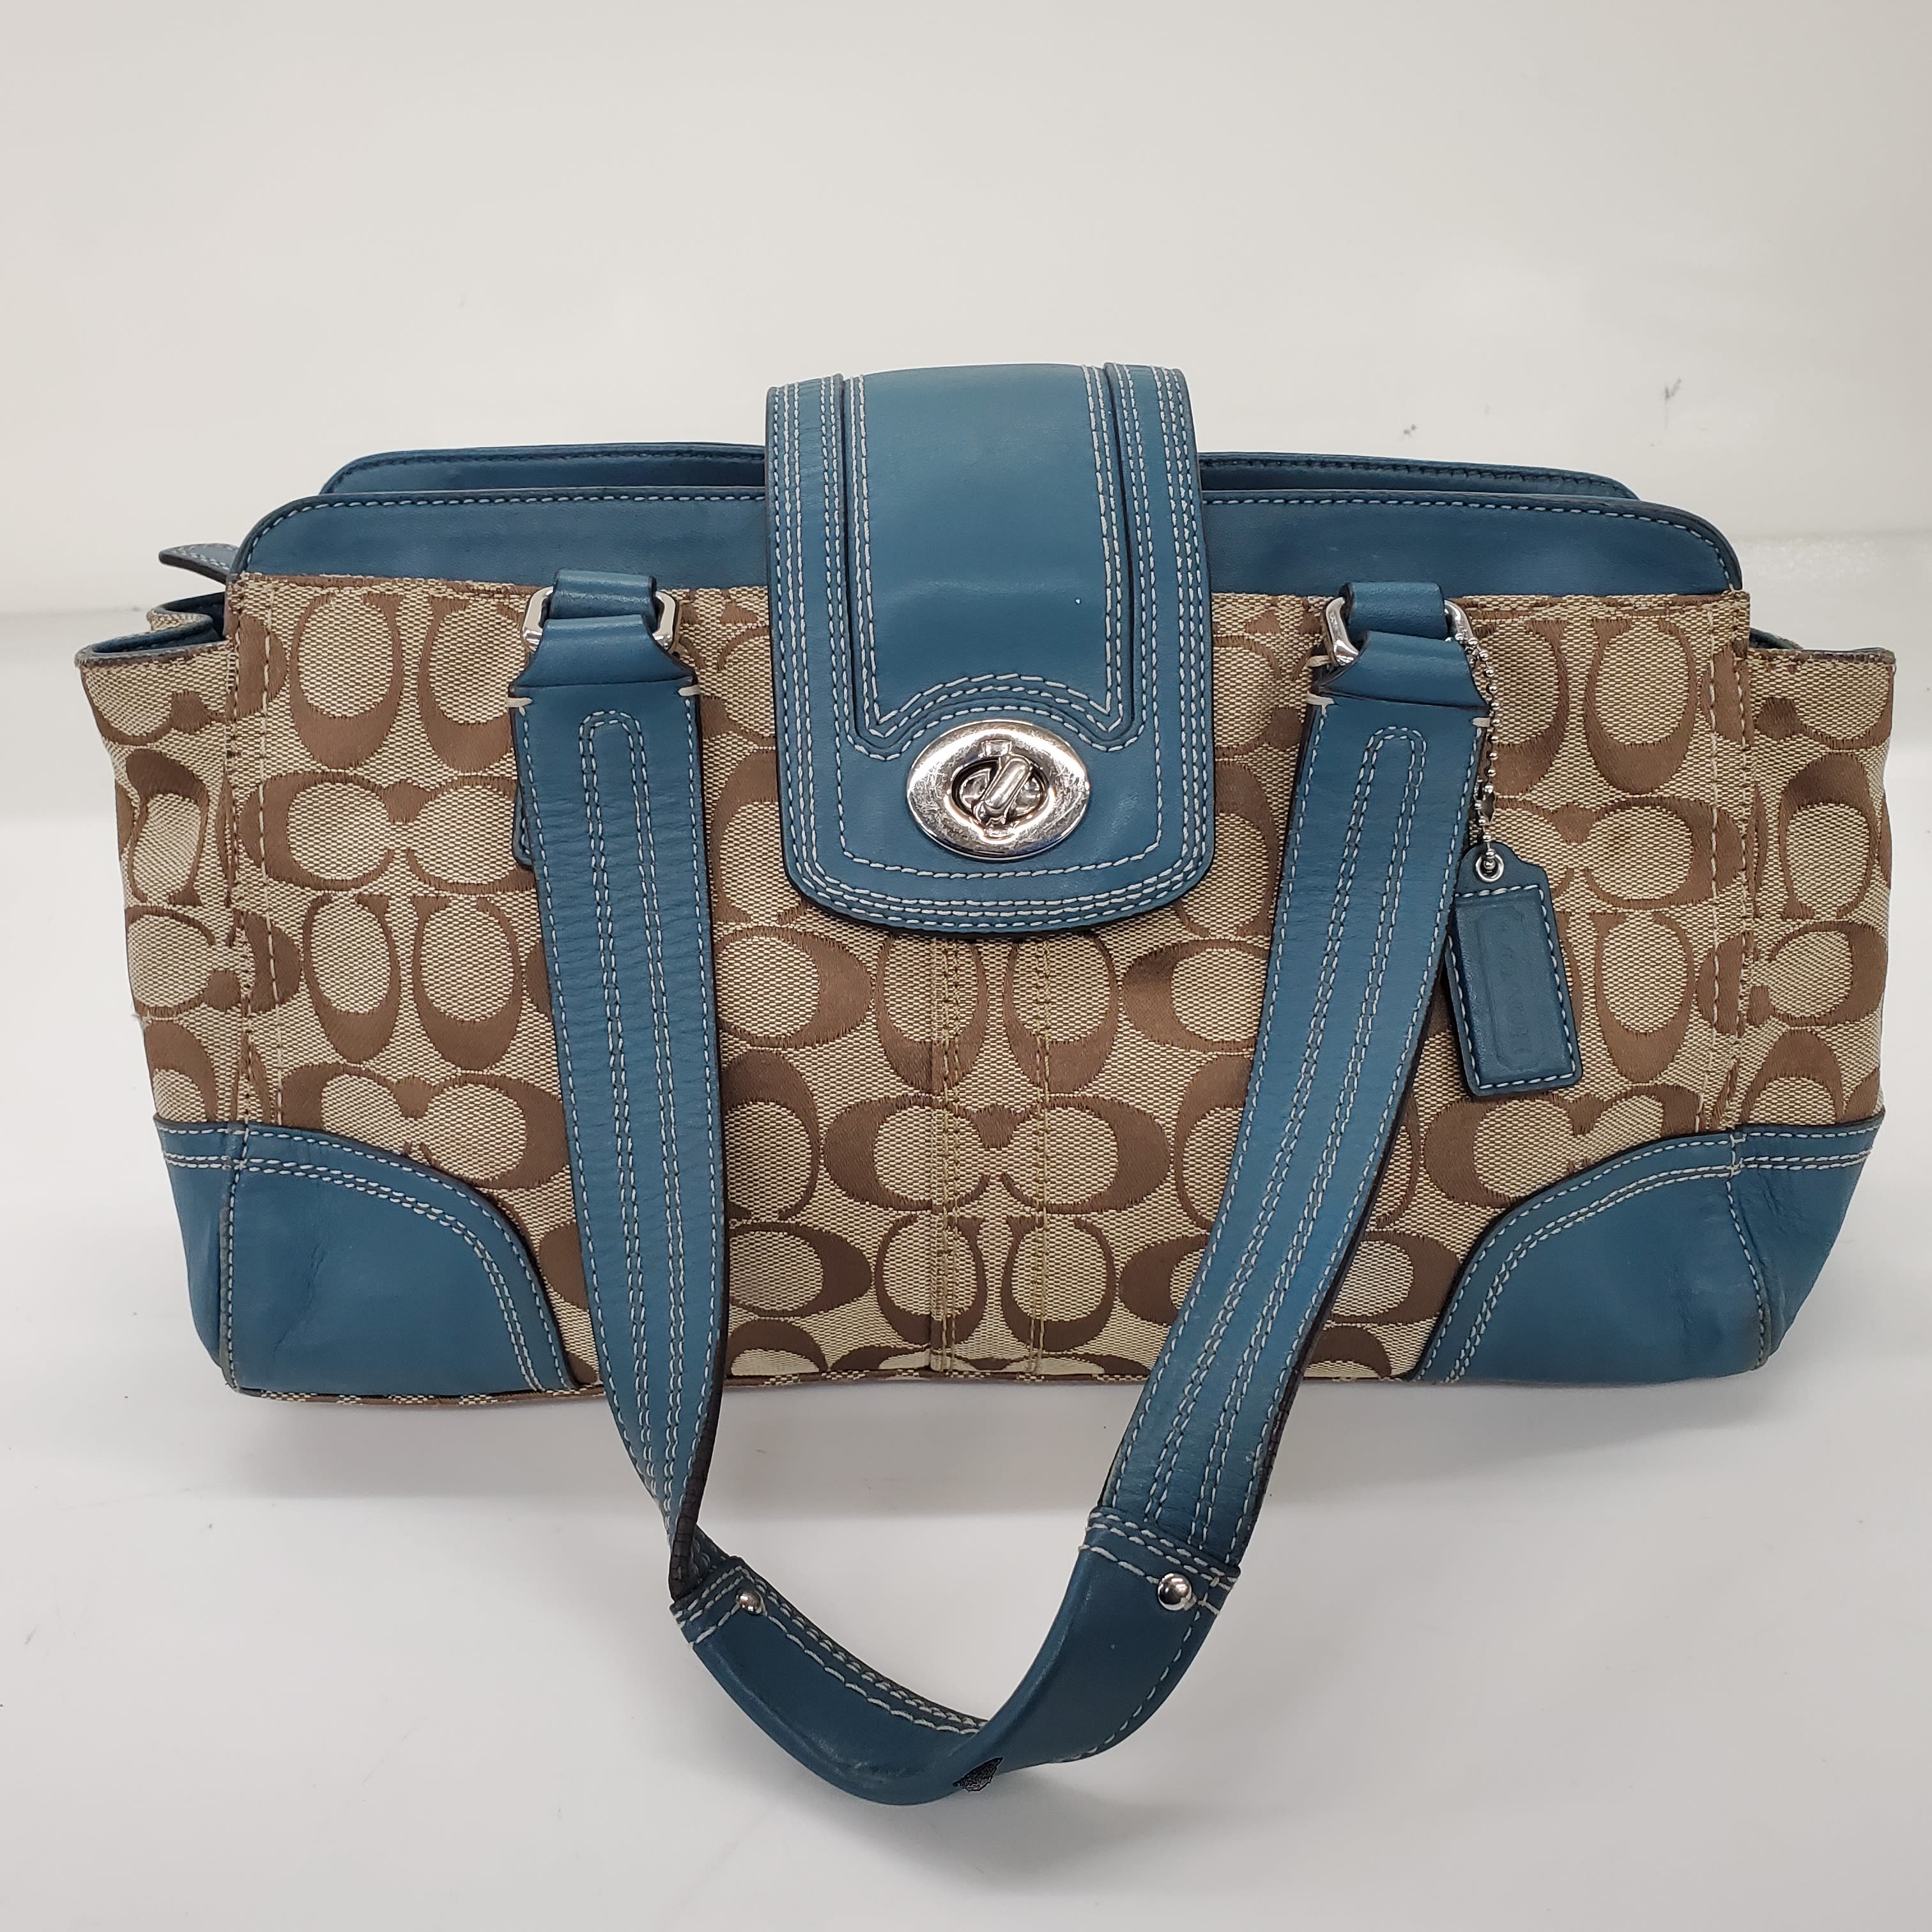 Buy the Coach Hamptons Beige Canvas Blue Leather Trim Carryall